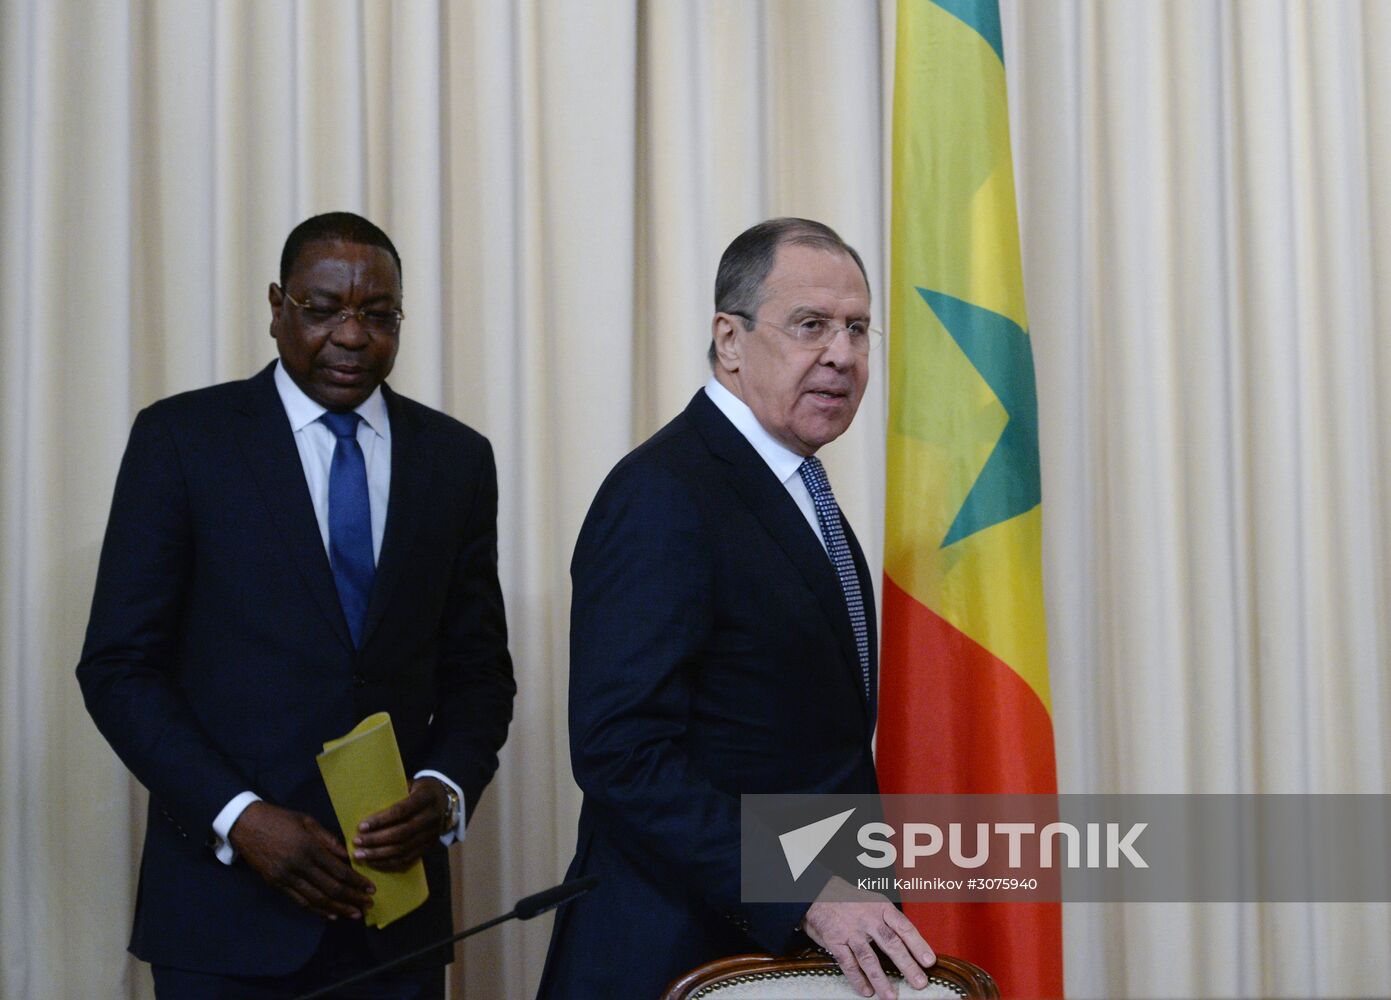 Russian Foreign Minister Sergei Lavrov meets with his Senegalese counterpart Mankeur Ndiaye